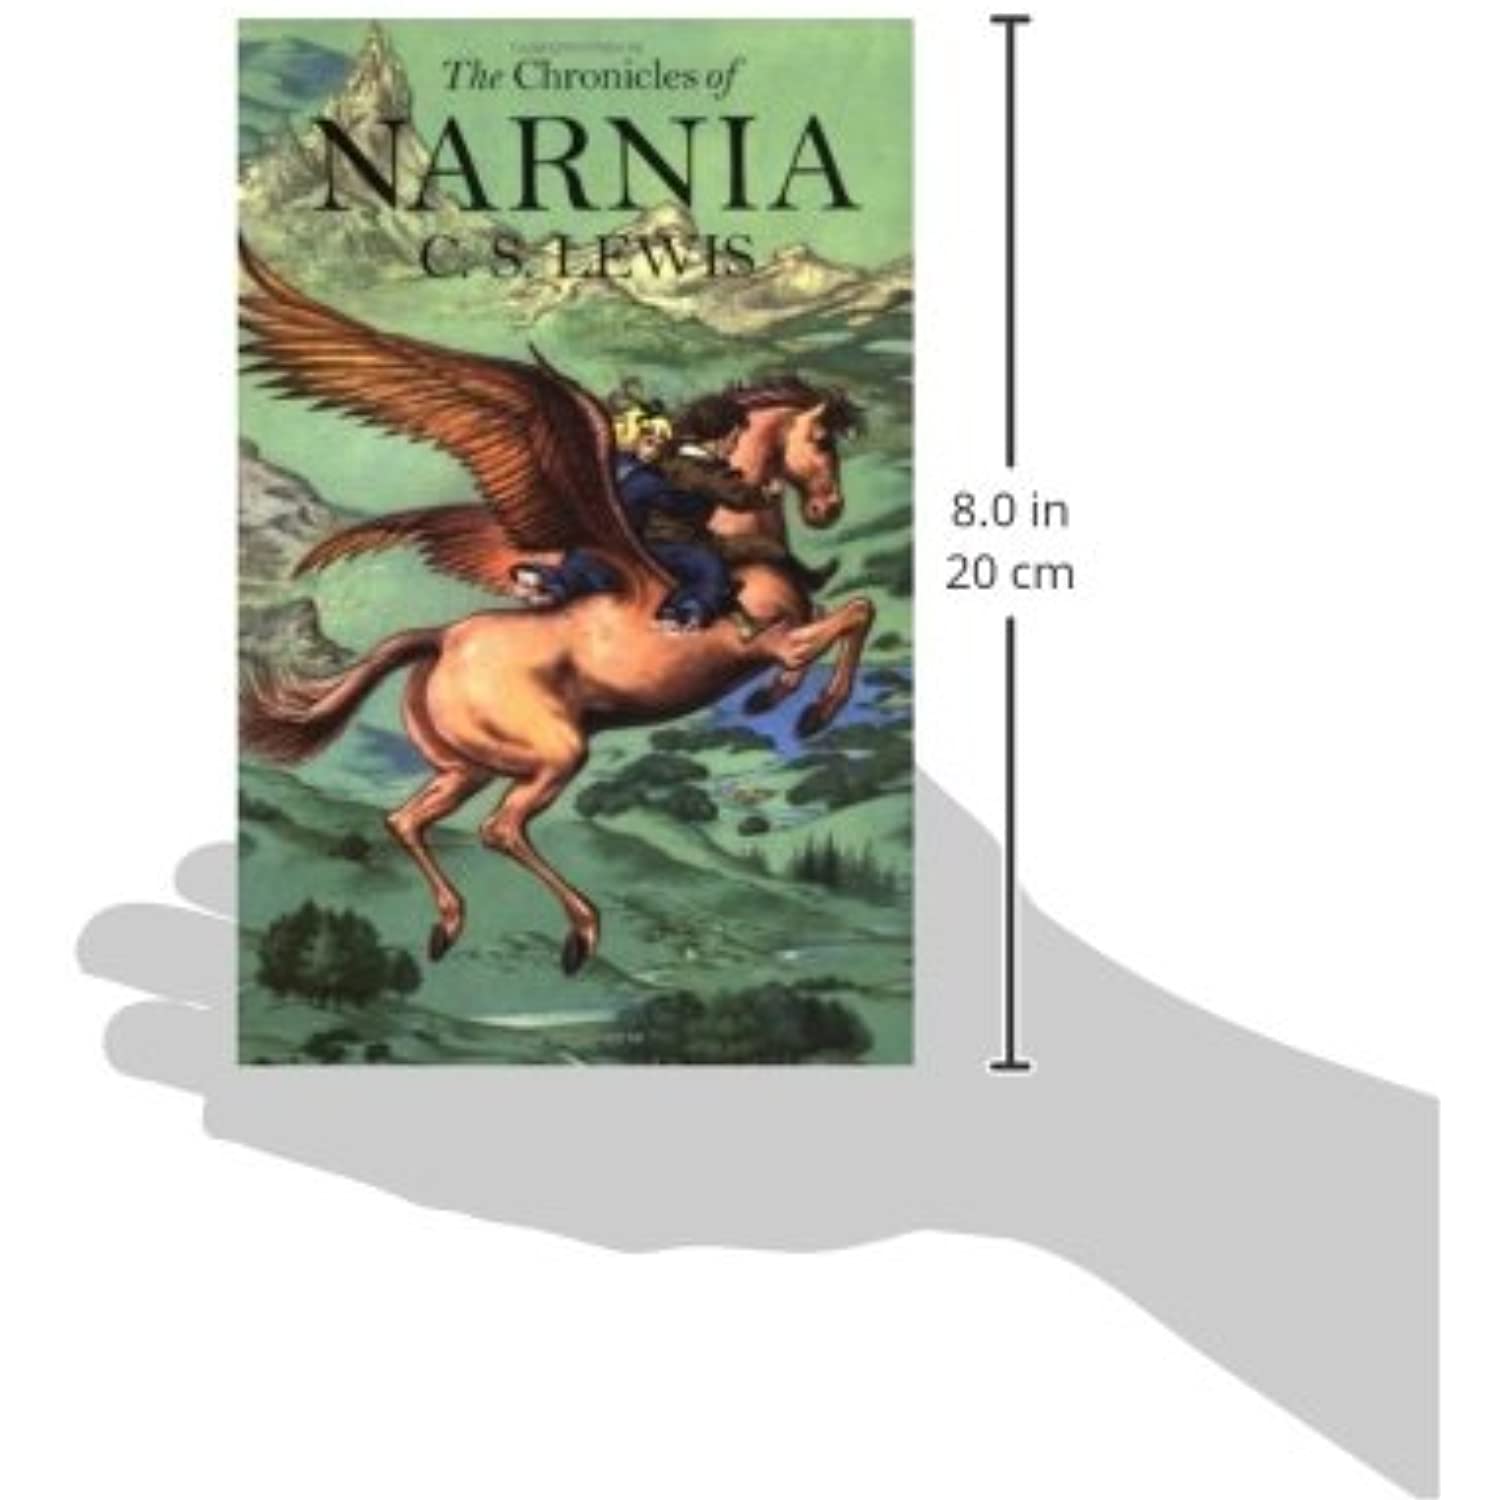 Box　Paperback　Box　Chronicles　The　Narnia:　7-　in　Books　Book　The　Set:　Chronicles　edition)(Paperback)　Narnia　Full-Color　of　(New　of　Set